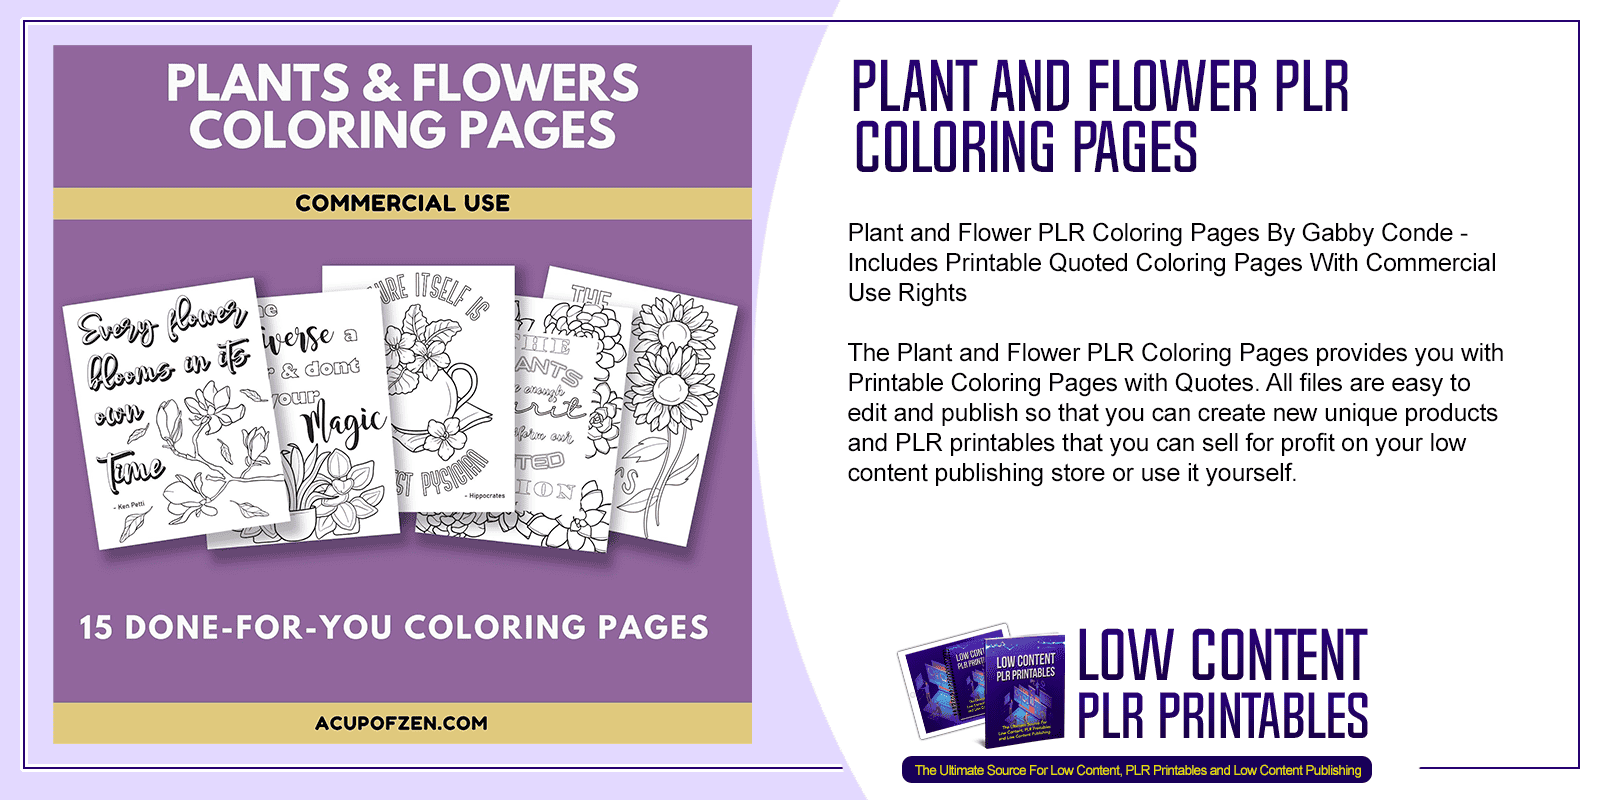 Plant and Flower PLR Coloring Pages